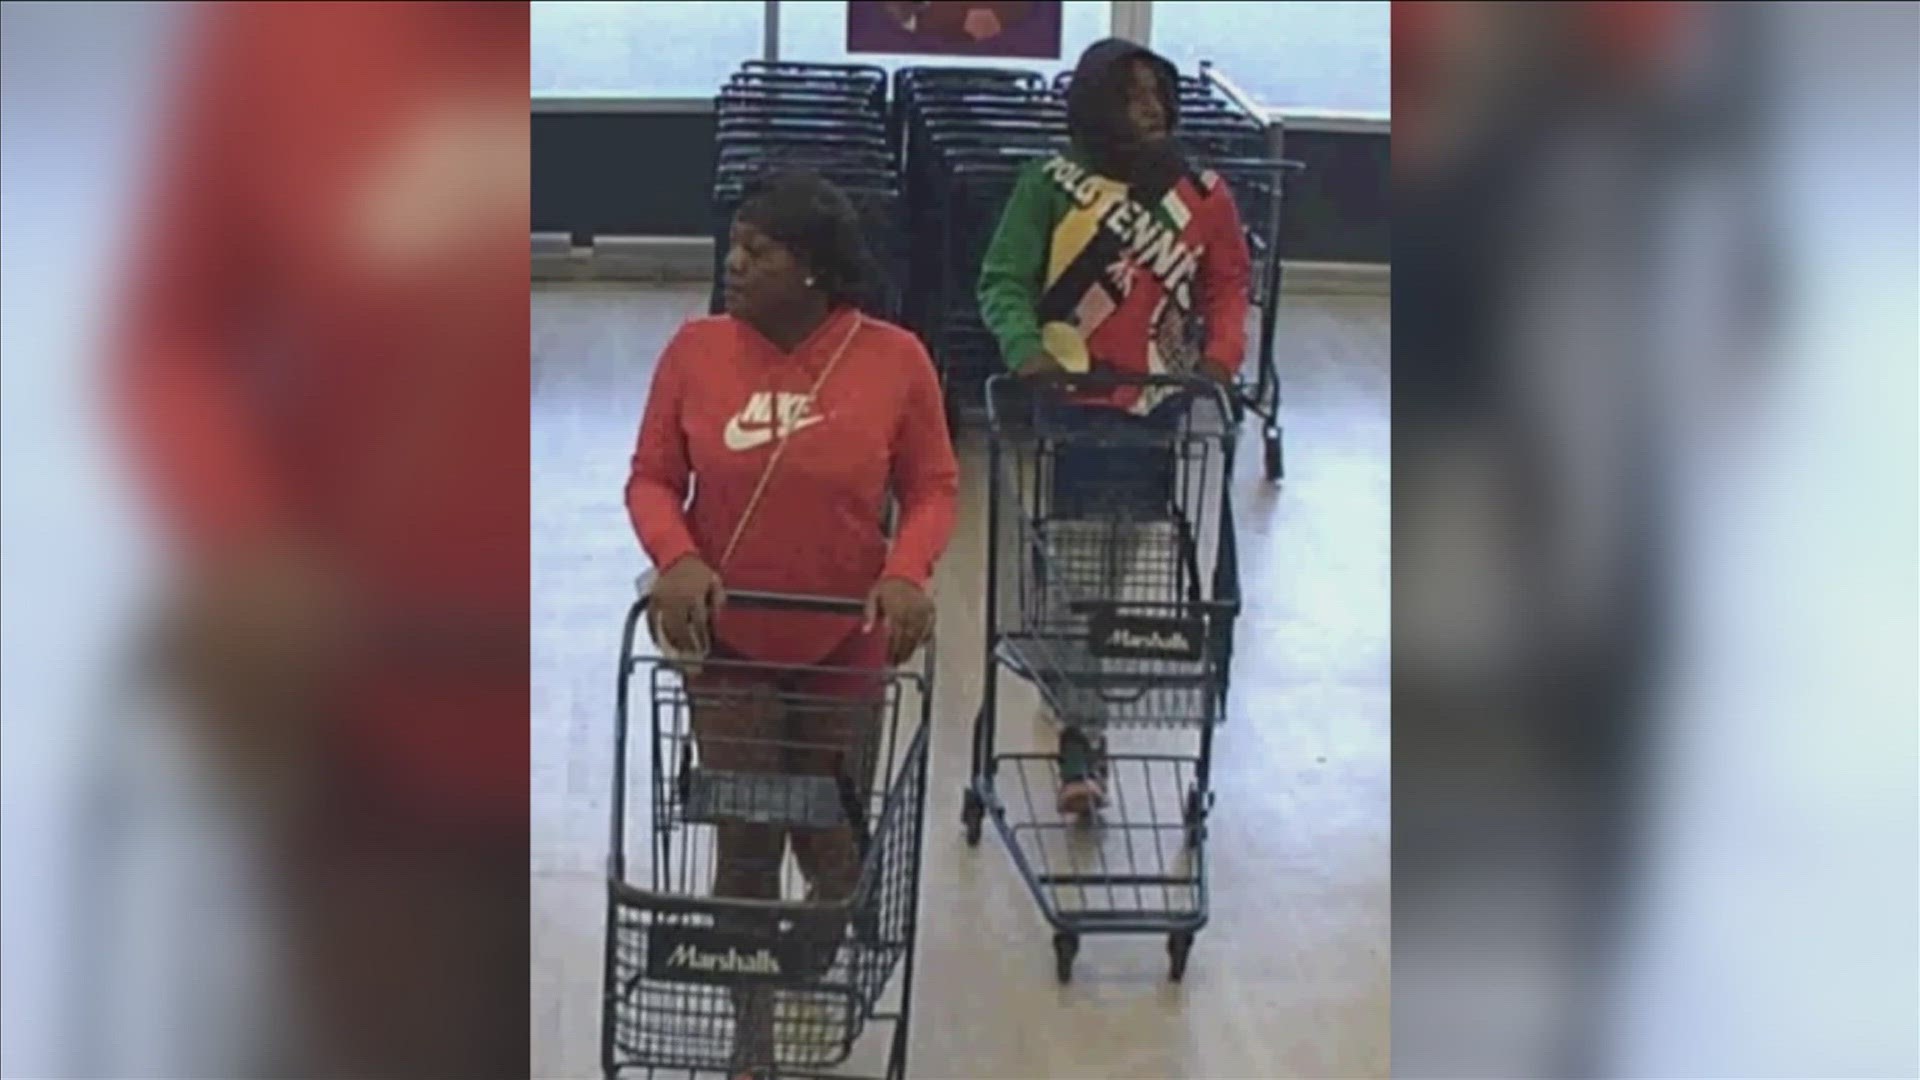 MPD is looking for two people that they said stole goods at a Marshalls clothing store before threats were made and a gun was reportedly shown to a security guard.